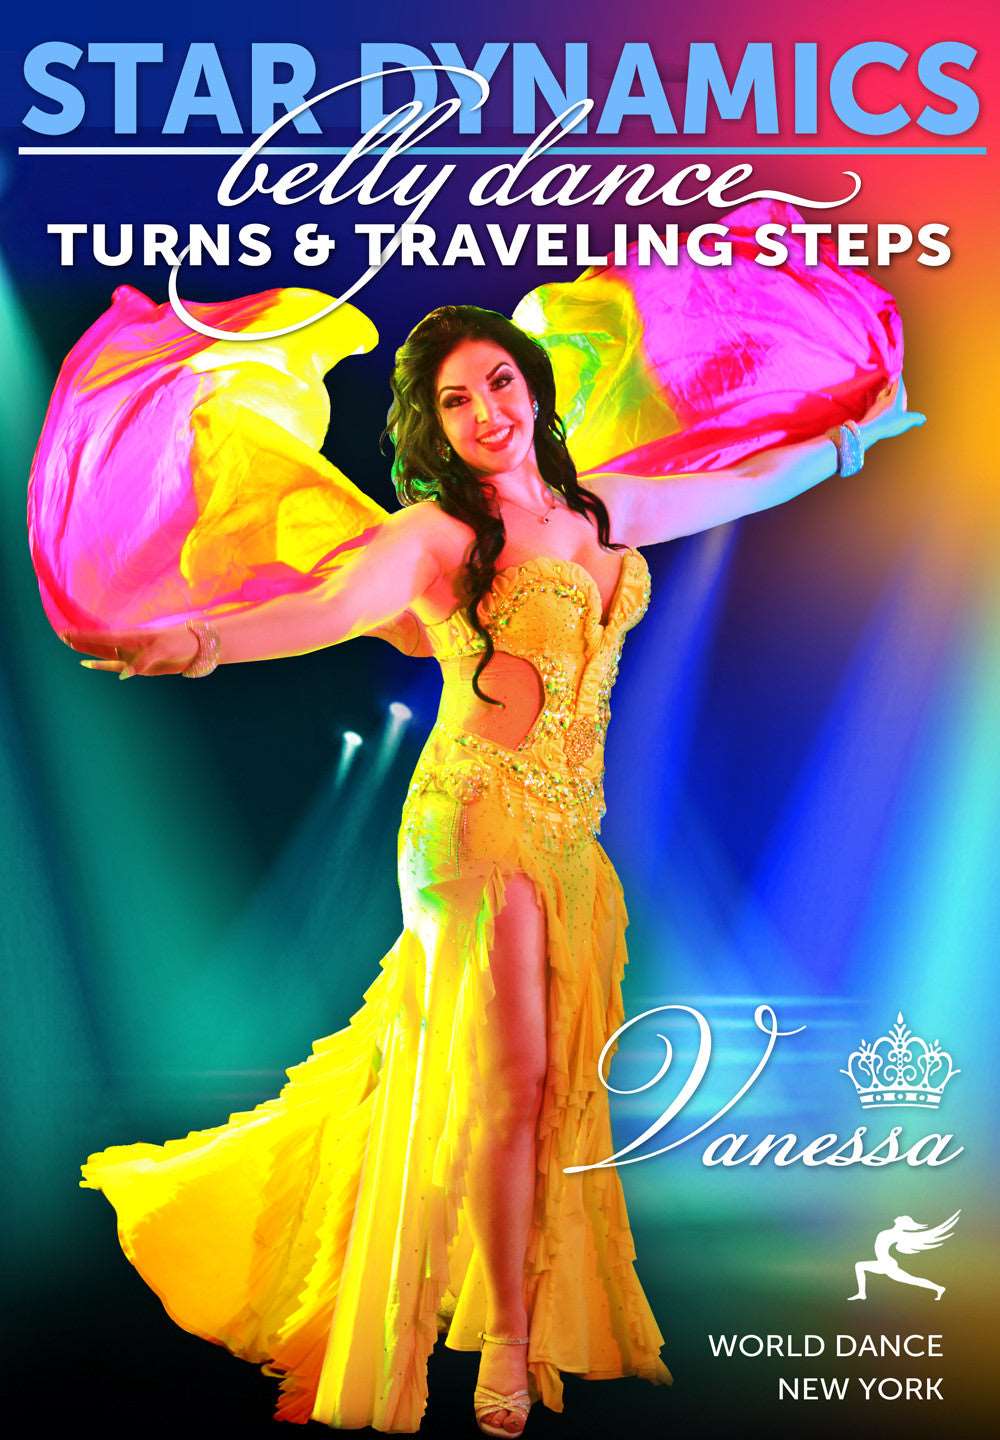 "Star Dynamics - Belly Dance Turns and Traveling Steps" DVD with Vanessa of Cairo - World Dance New York